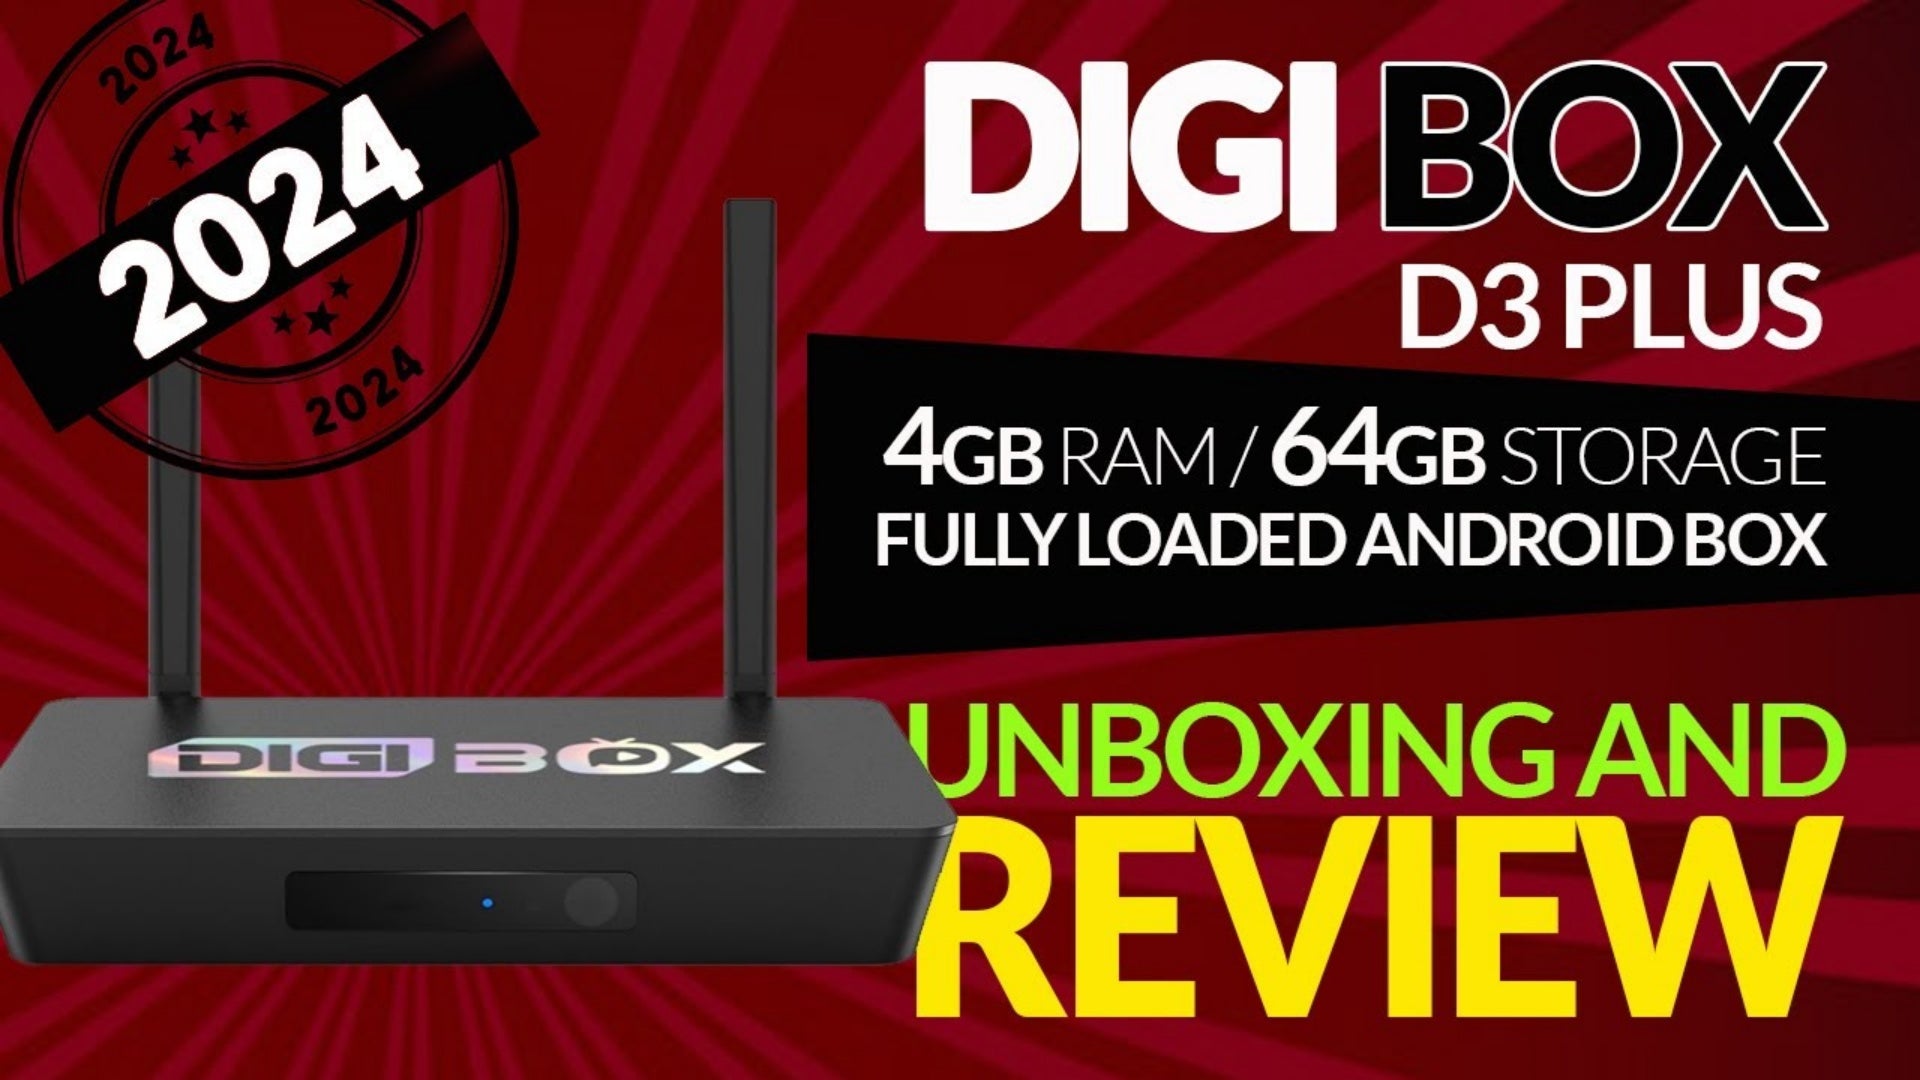 Load video: The Ultimate Tech Upgrade: Digibox D3 Plus Android Box Unboxing and In-Depth Review!